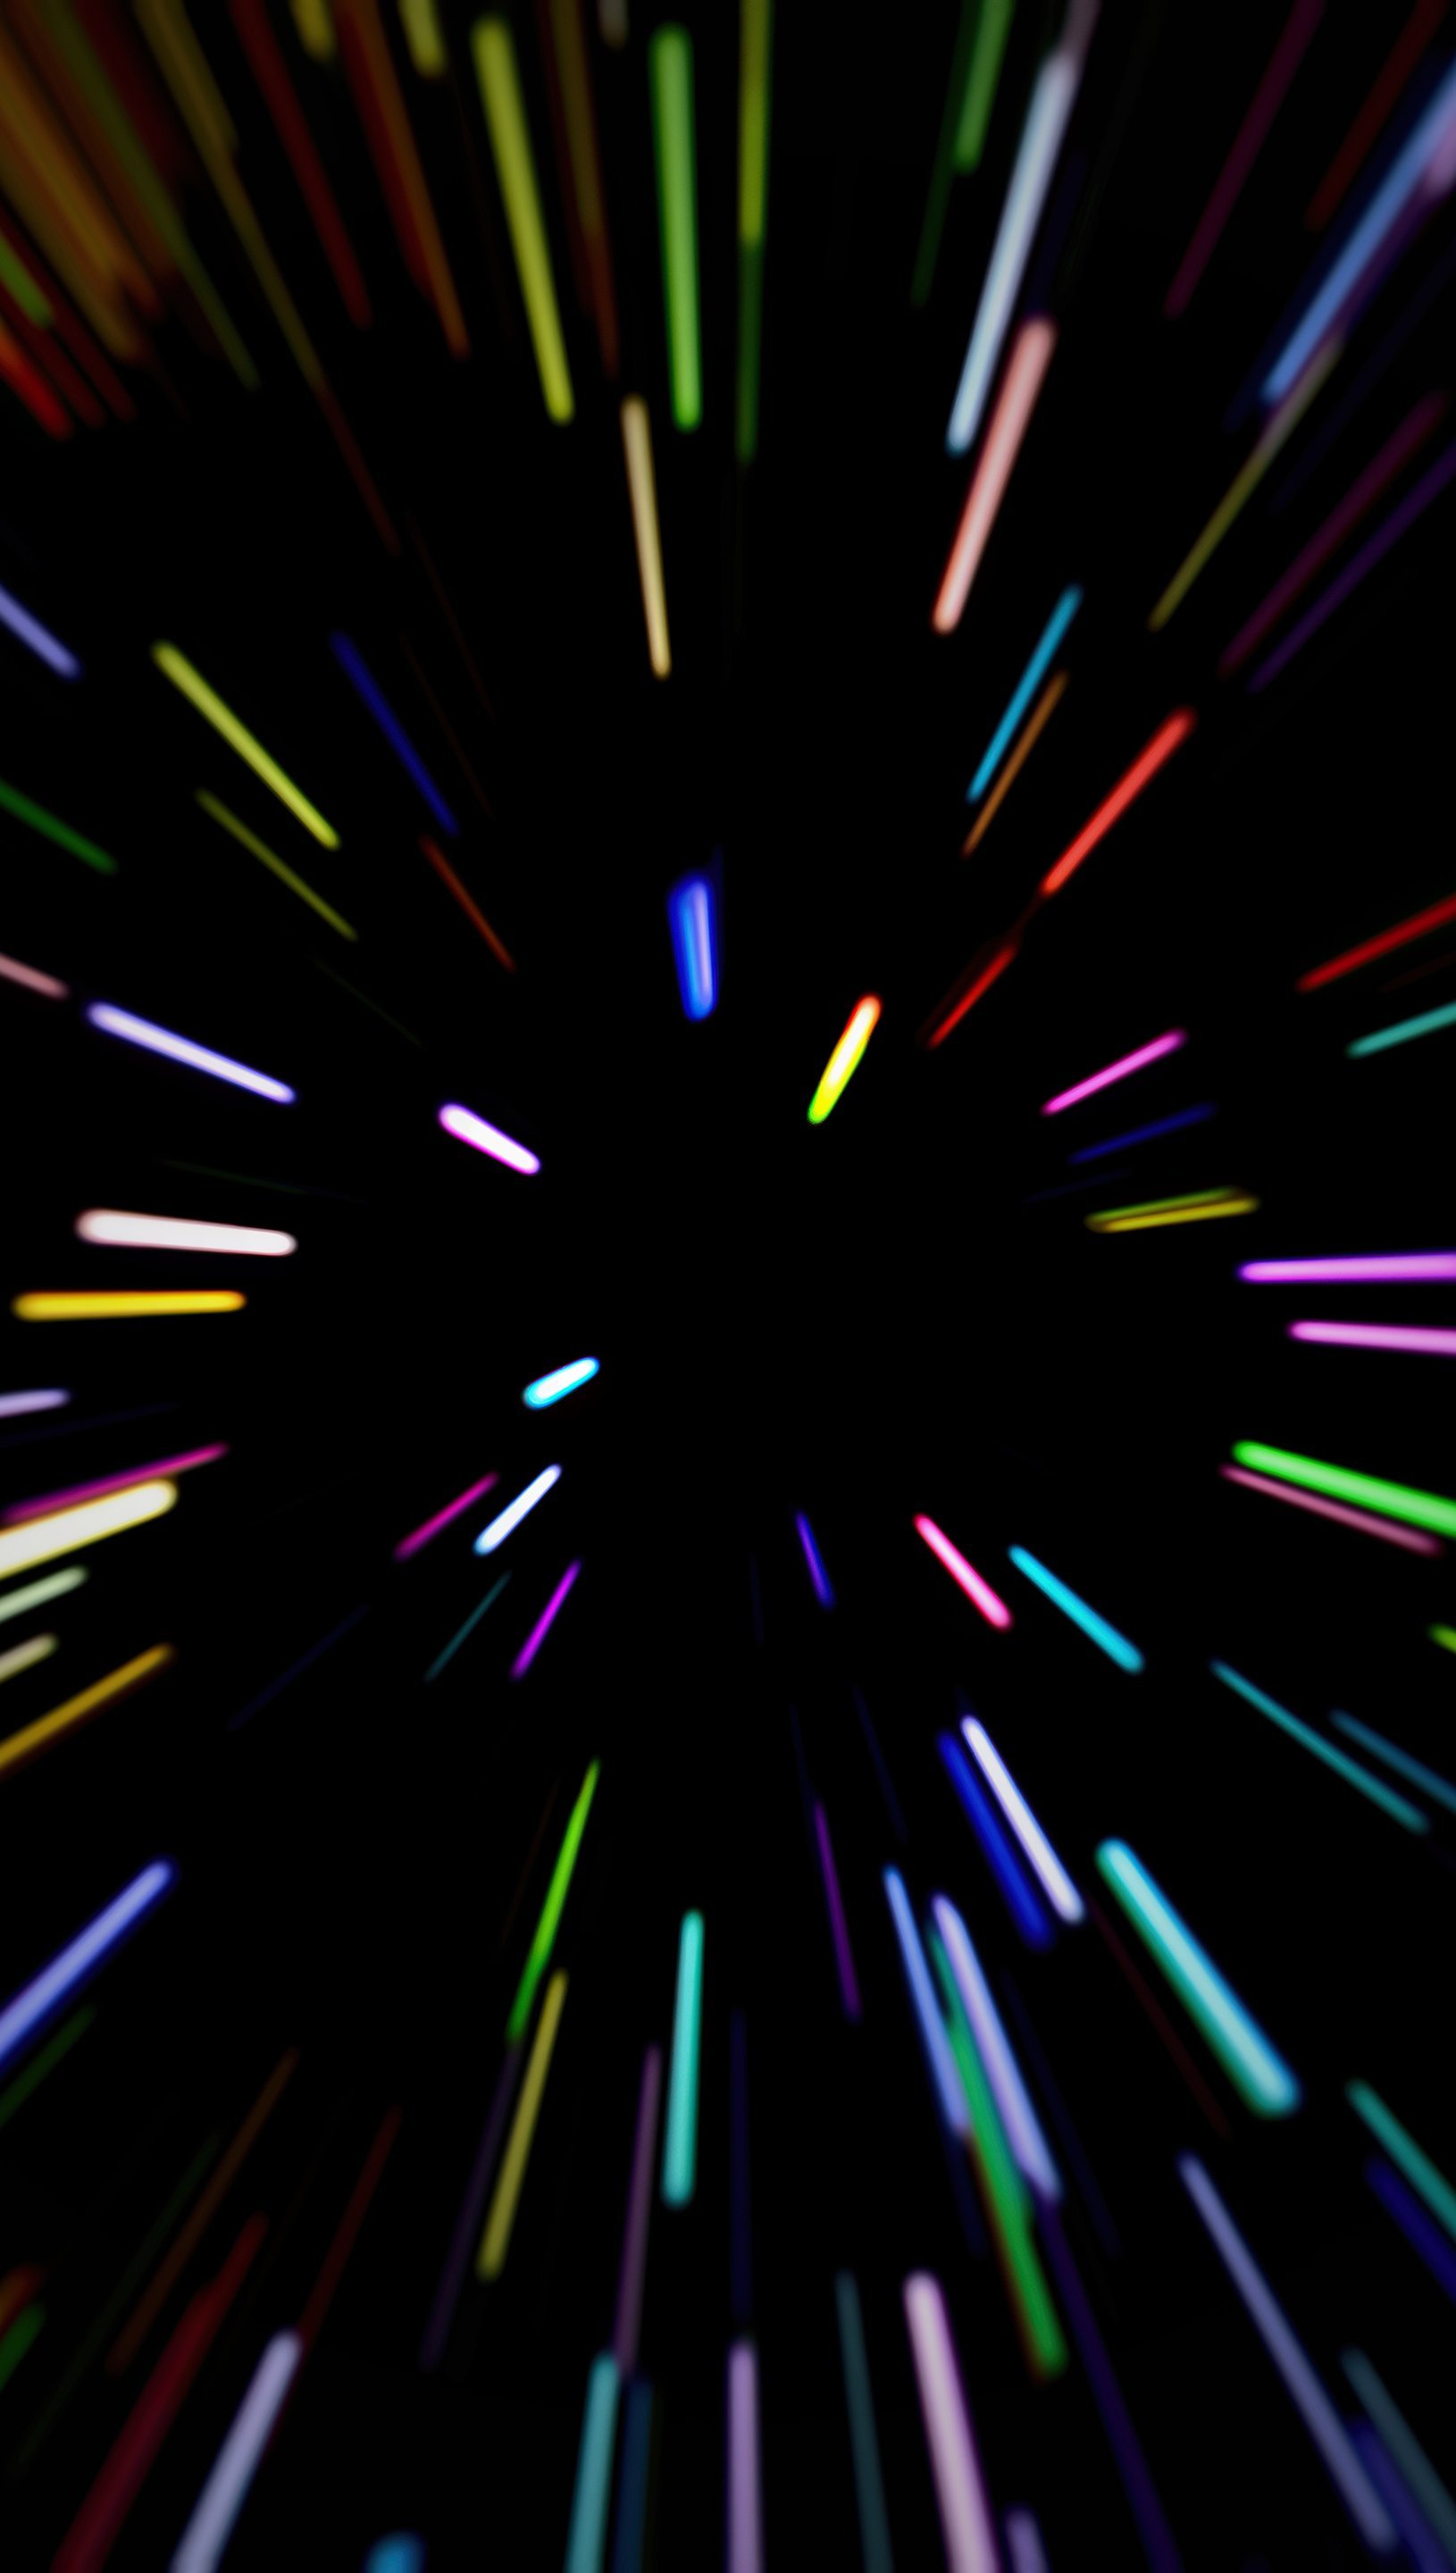 Colored Lines moving Wallpaper 5k Ultra HD ID:7361